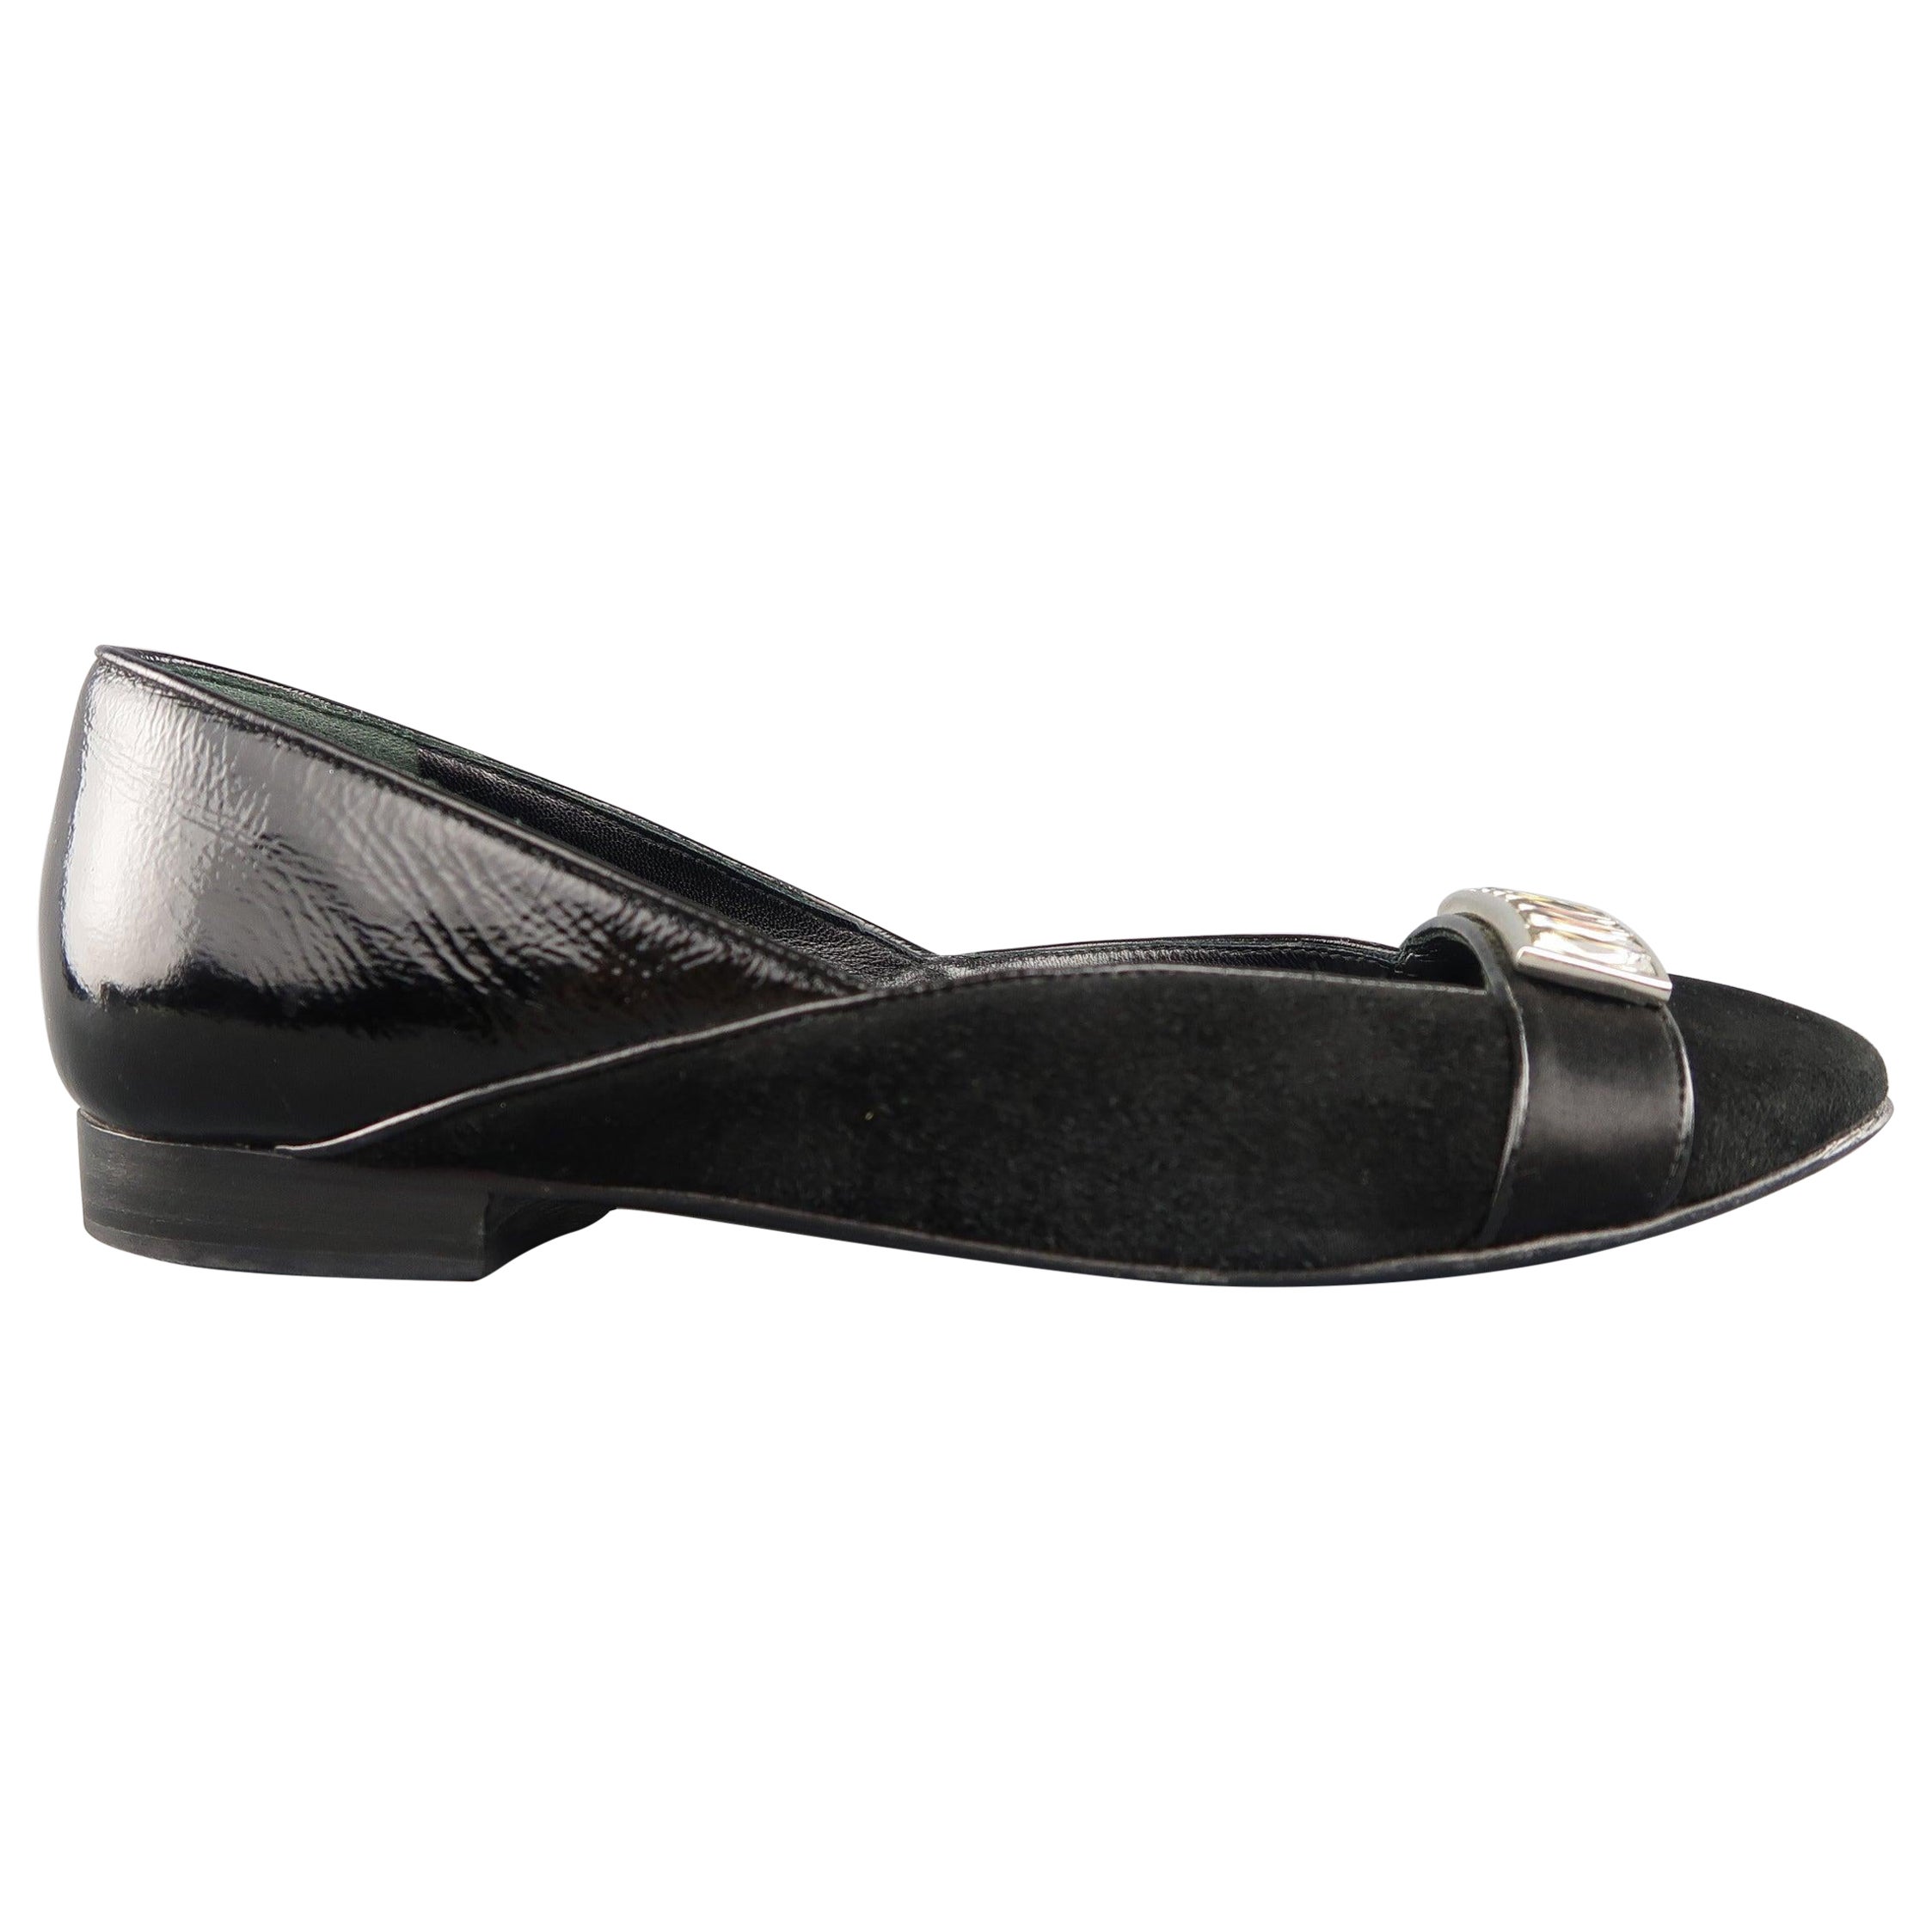 JUDITH LEIBER Size 5 Black Suede & Patent Leather Rhinestone Flats For Sale